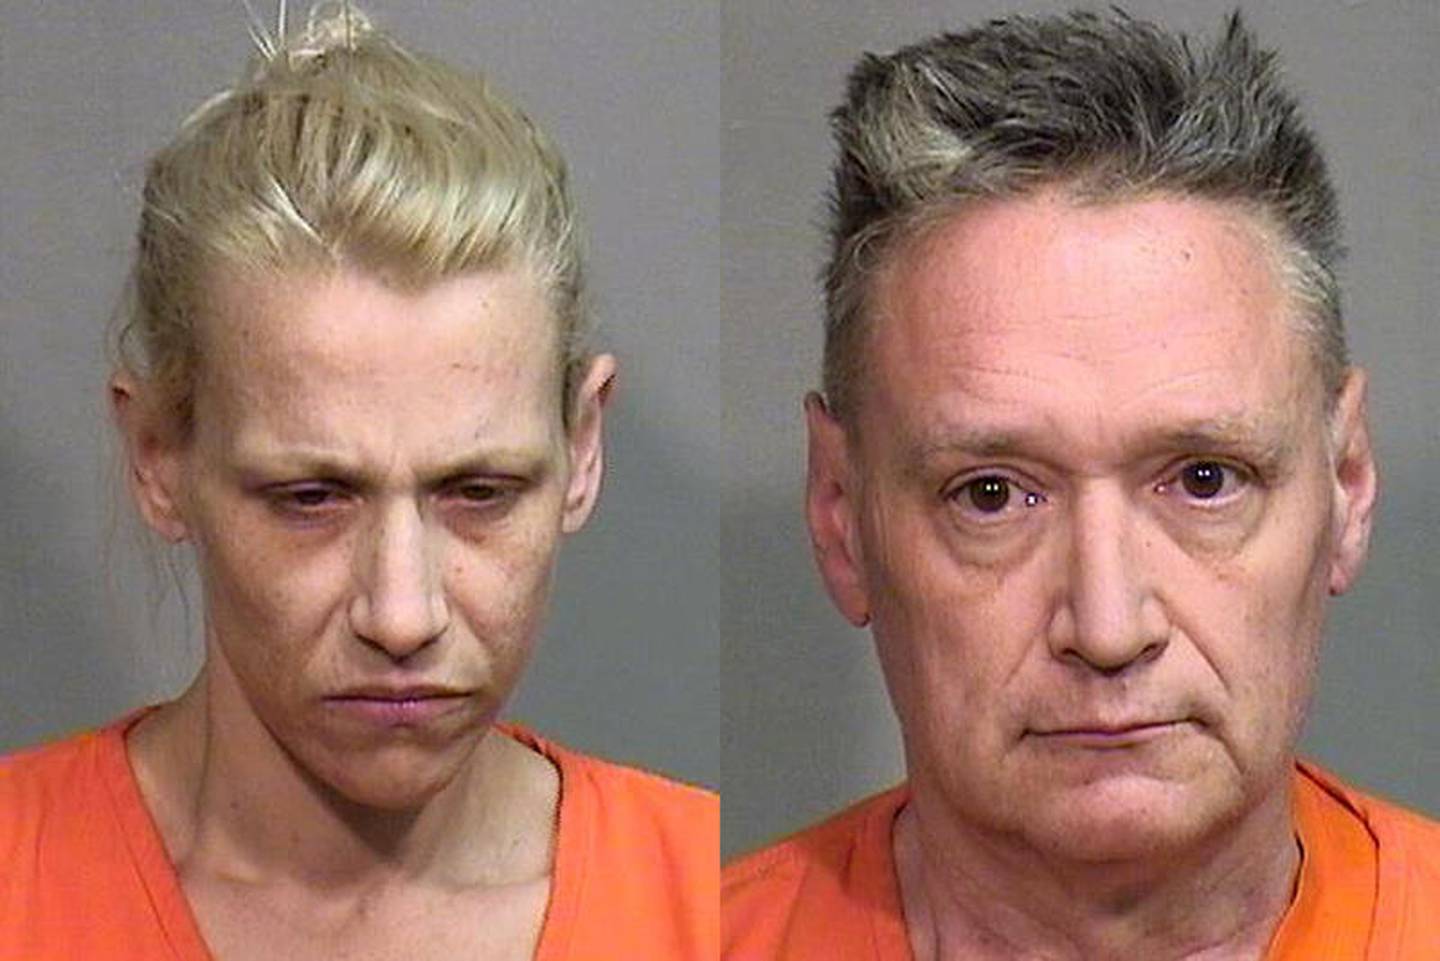 JoAnn Cunningham, 36, of Crystal Lake, and Andrew Freund, 60, of Crystal Lake, face multiple charges including first-degree murder in connection with the death of their son, Andrew "A.J." Freund. Police announced the charges Wednesday after finding the boy's body in a rural area outside Woodstock.